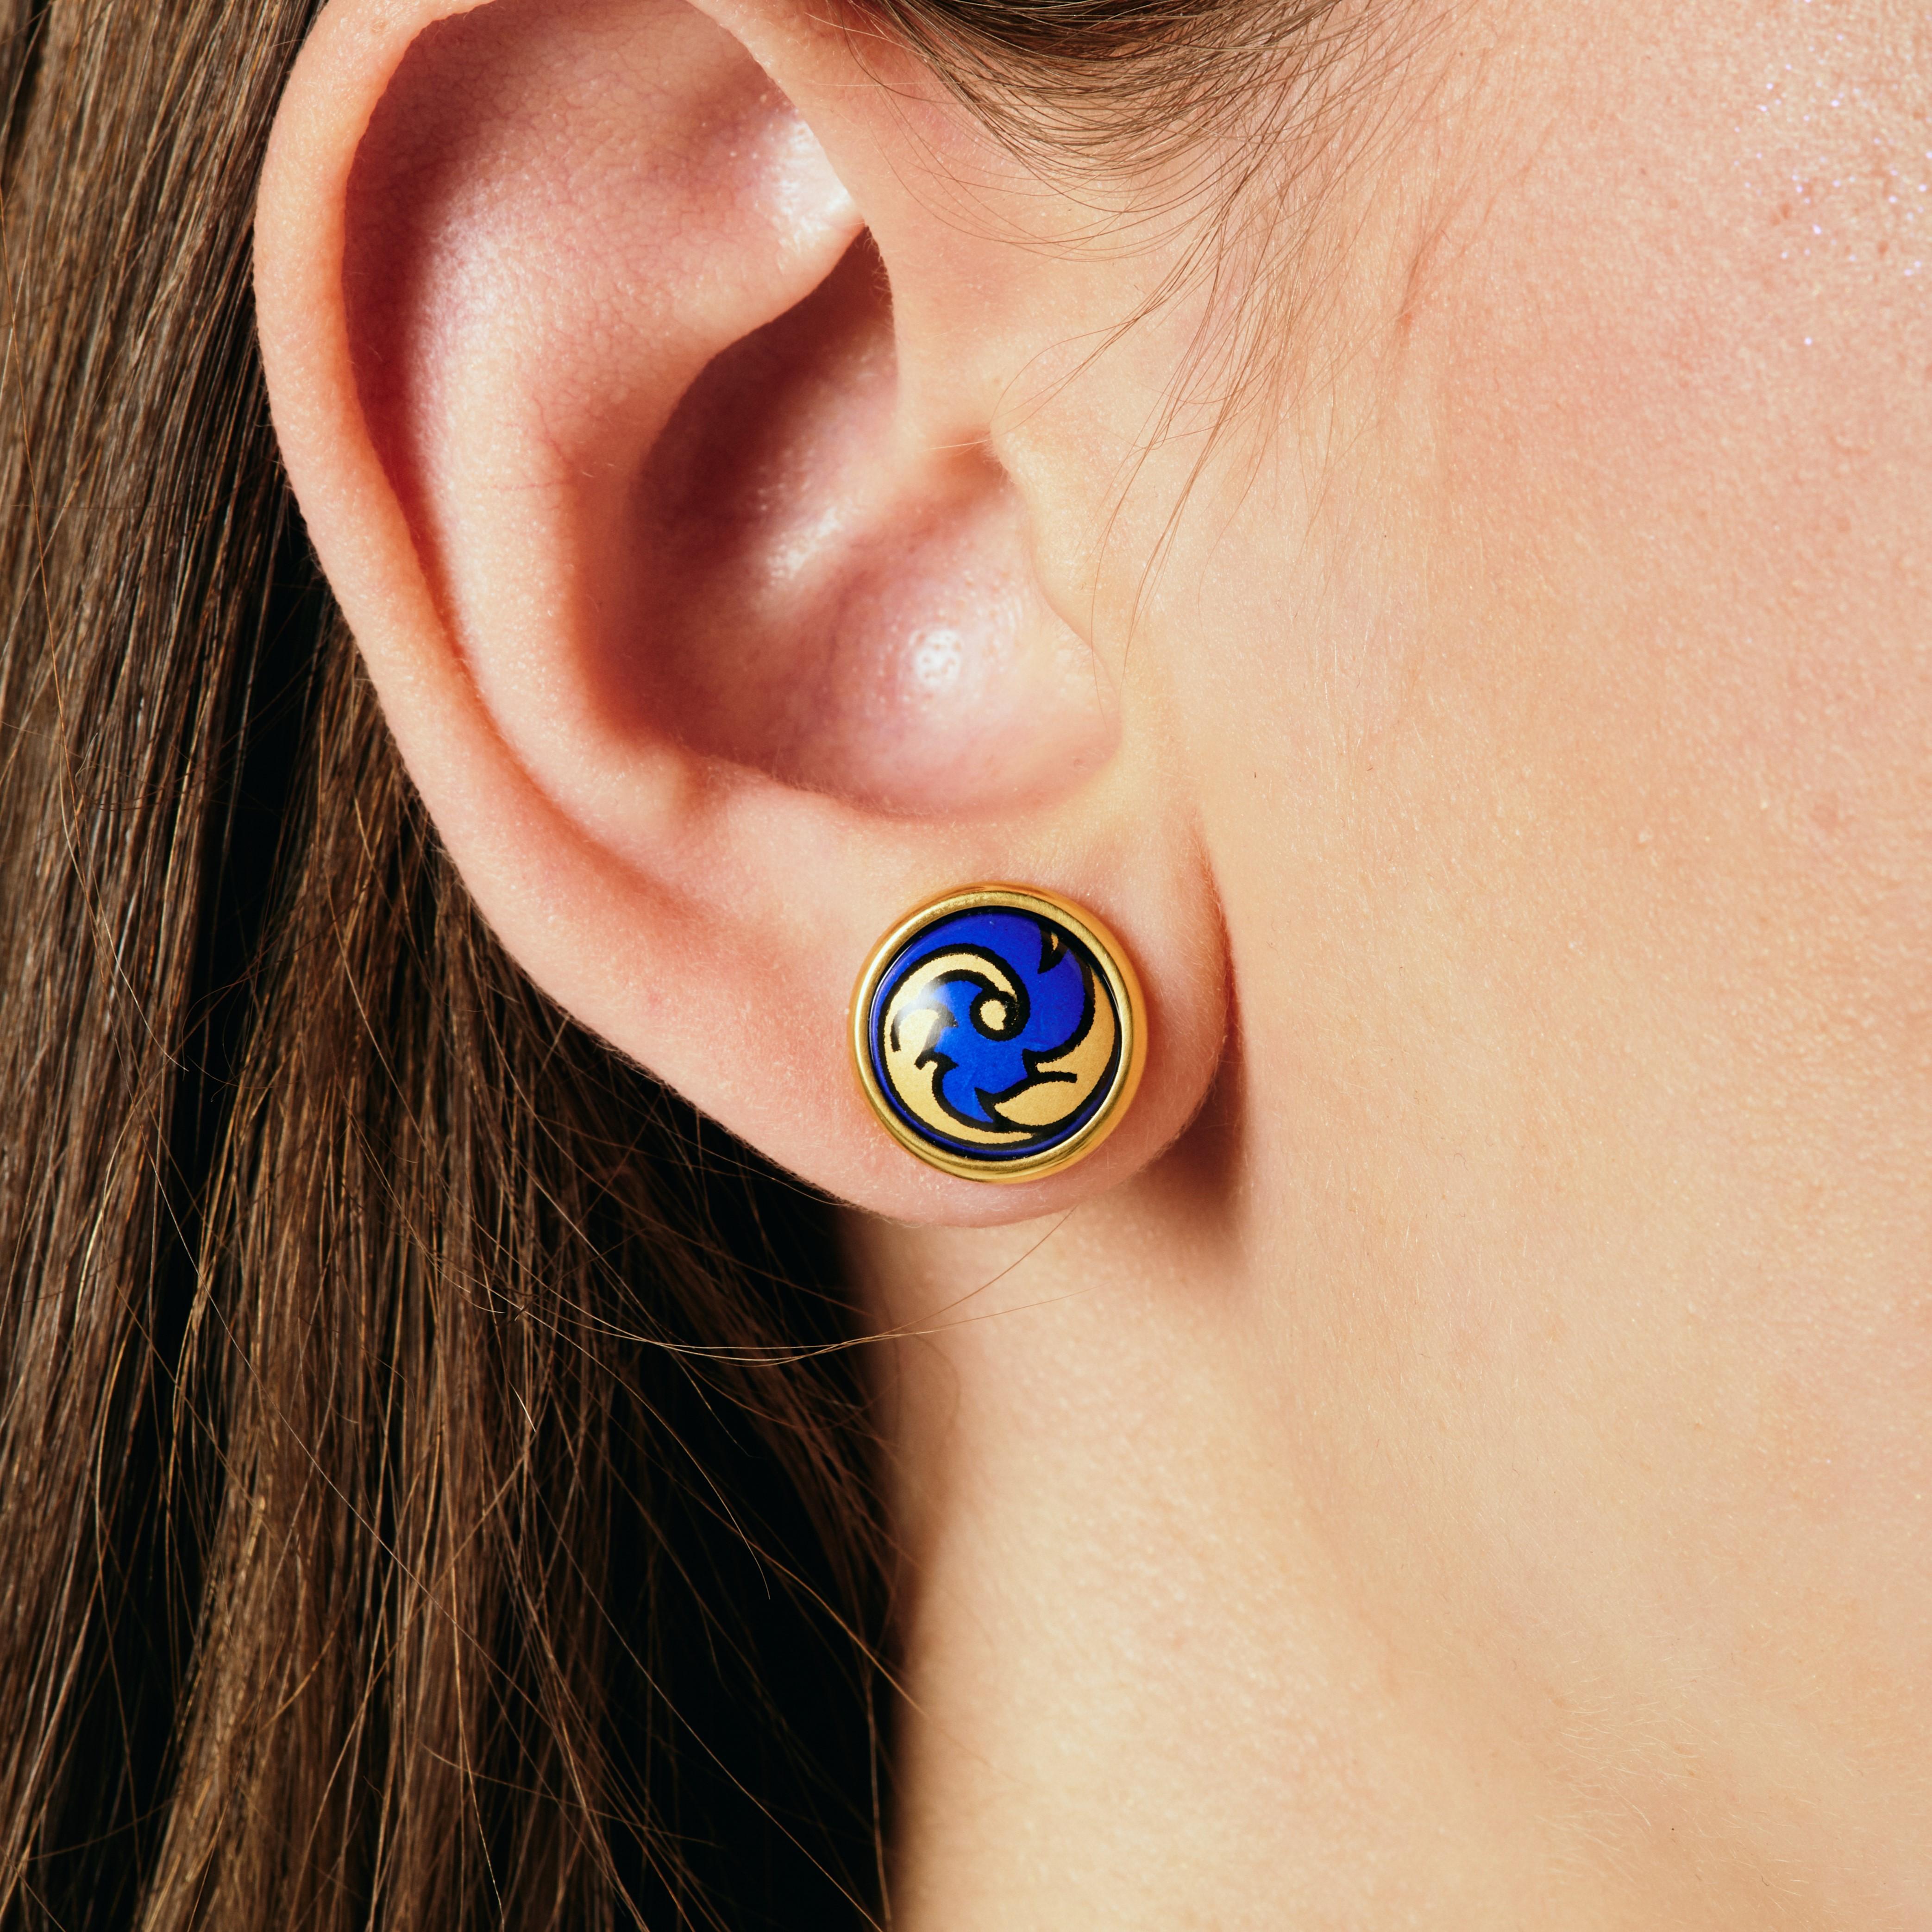 Introducing our Elle Earrings. Indulge in exquisite style with our 18k gold-plated stainless steel earrings. Hand-painted with vibrant fire enamel, these hypoallergenic earrings are a true masterpiece of luxury and beauty. Shop now and elevate your